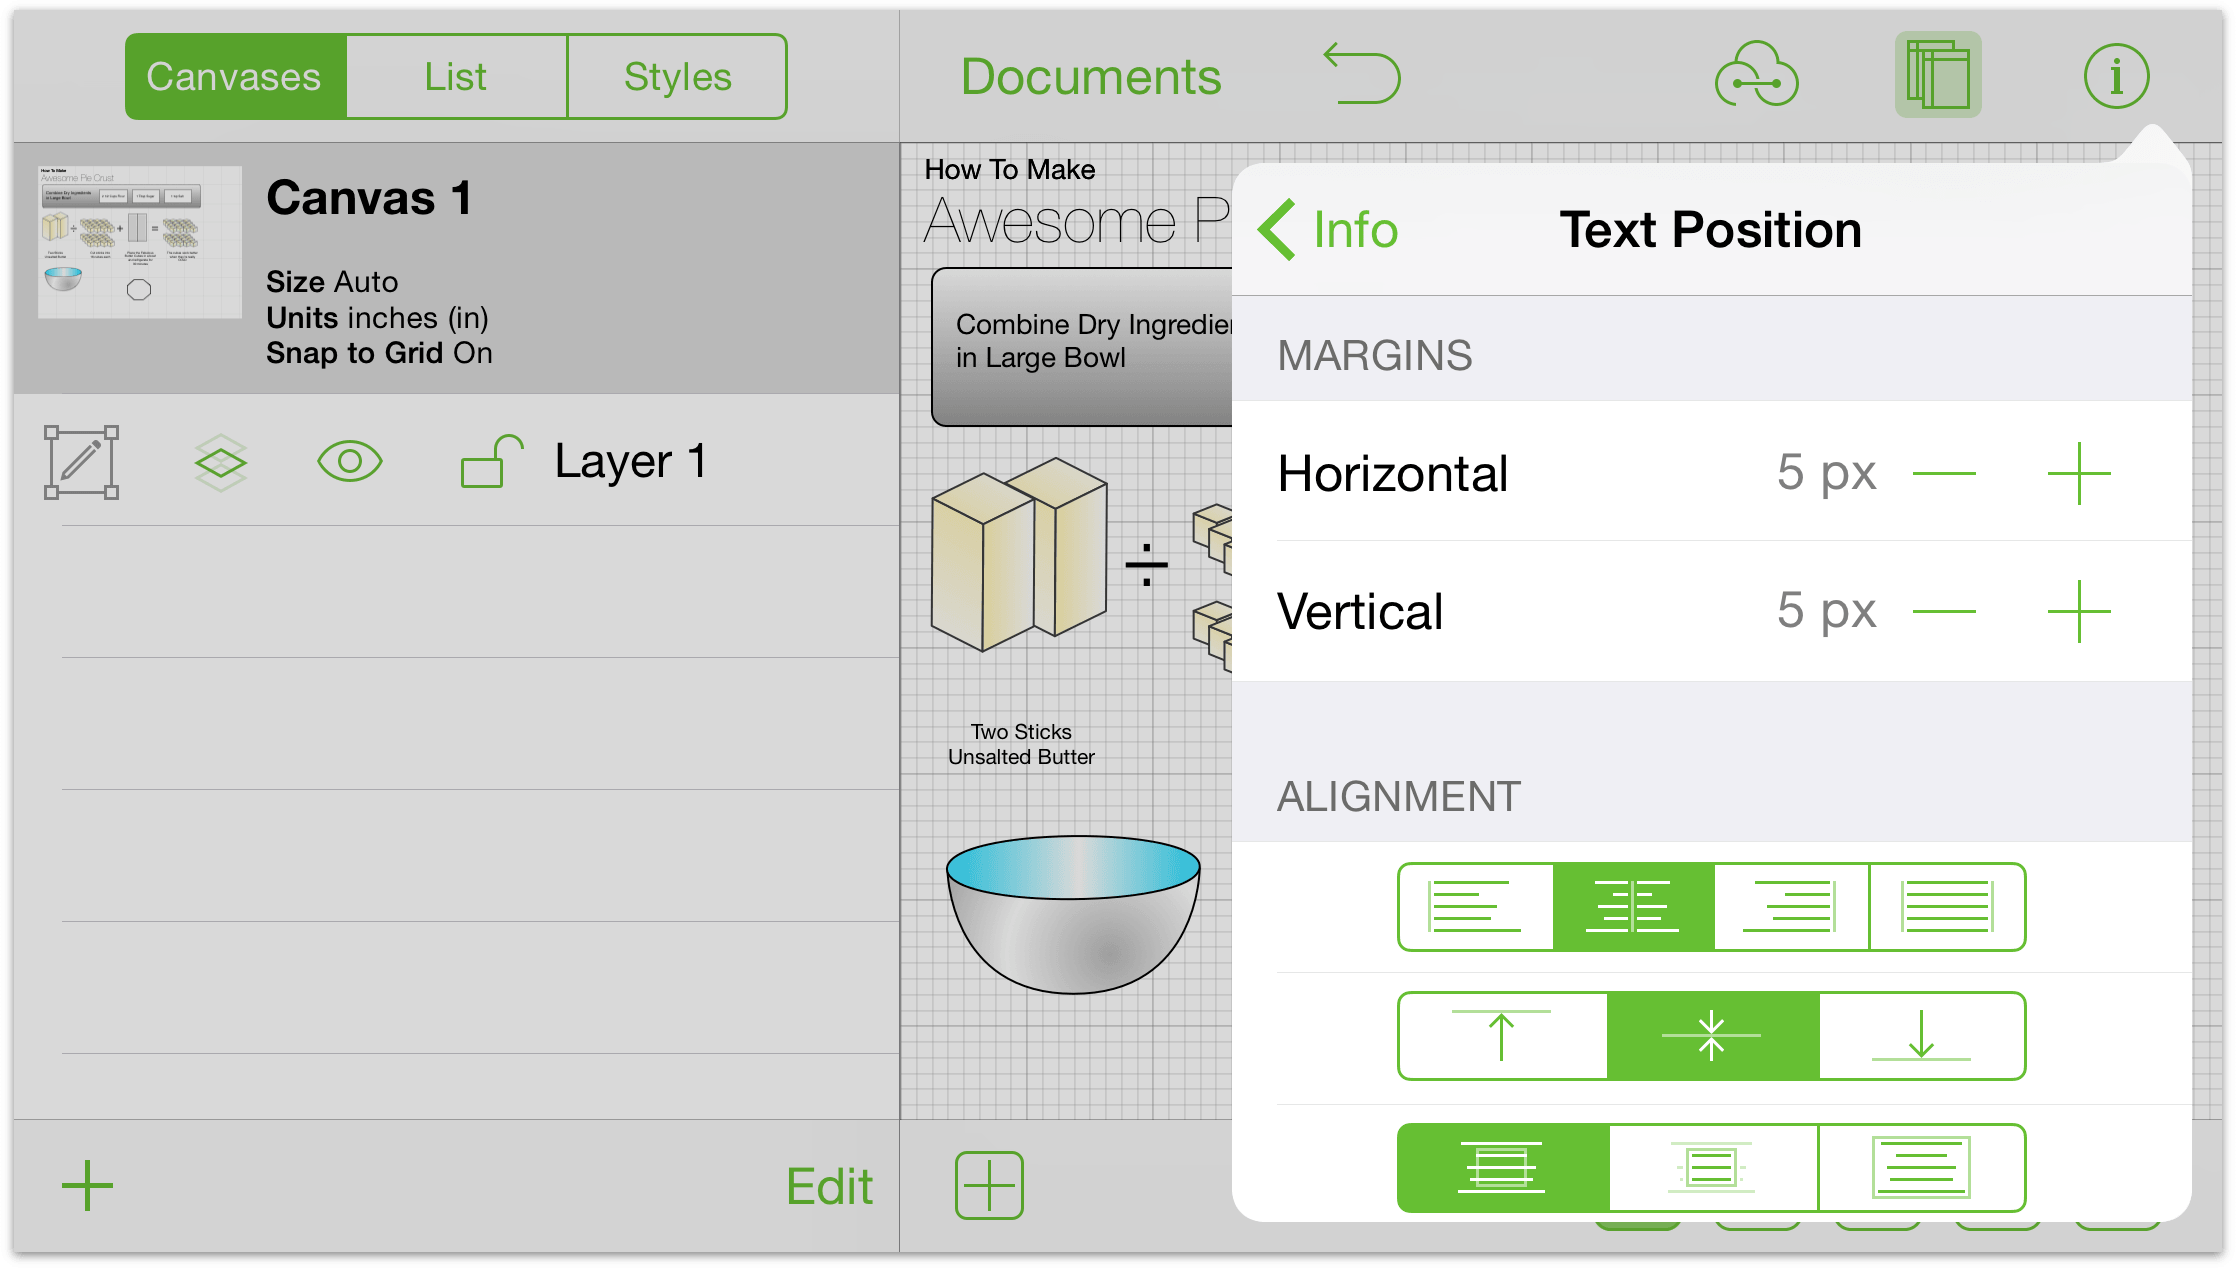 The Text position inspector